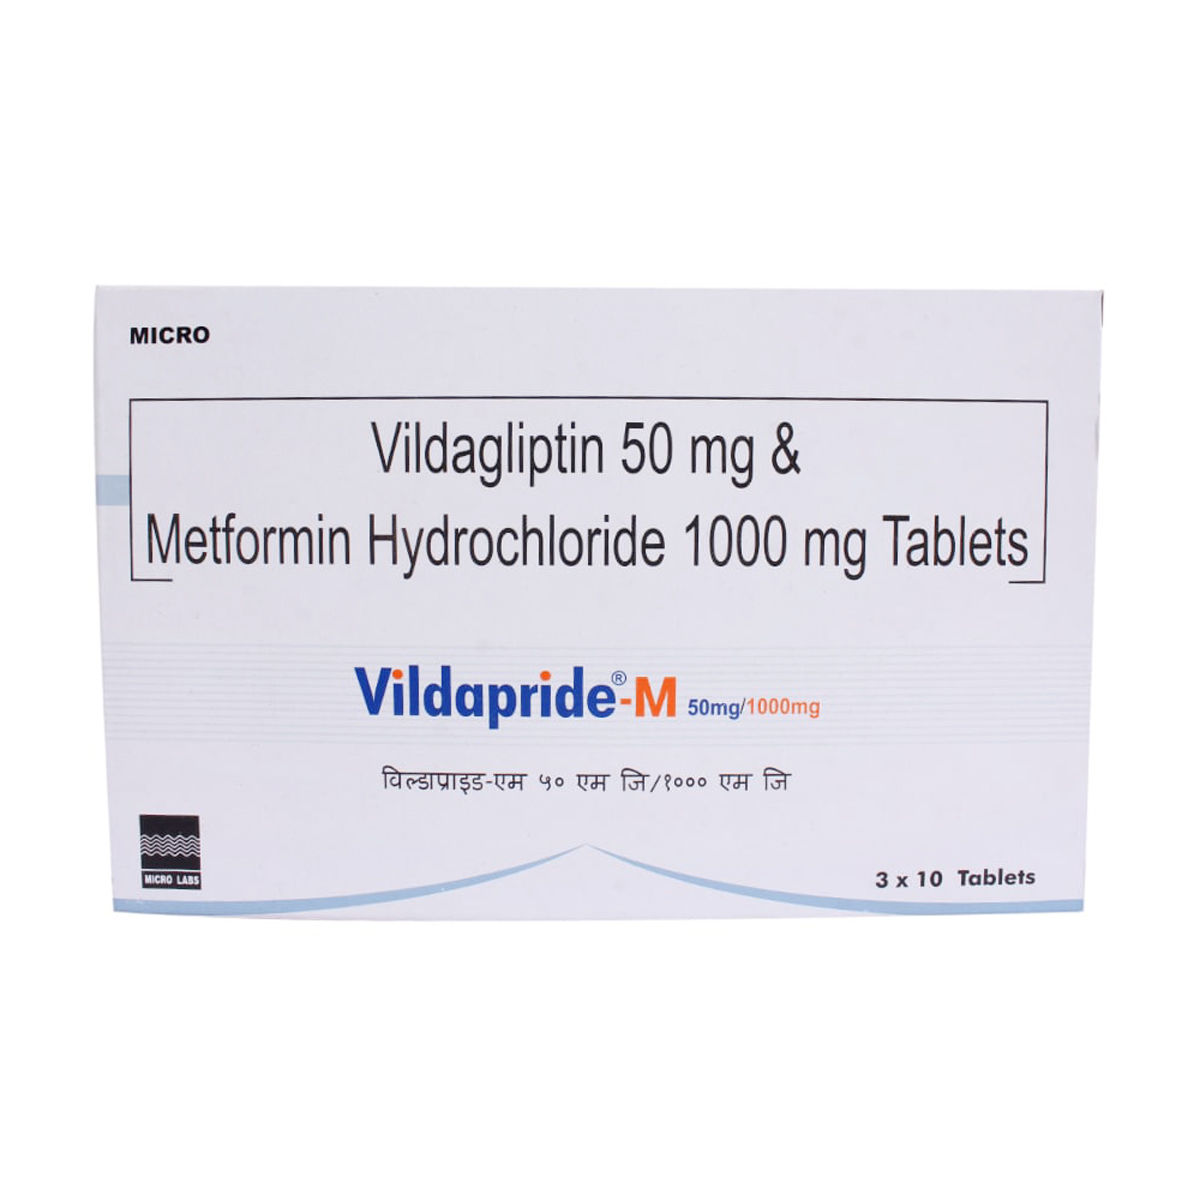 Vildapride M 50mg/1000mg Tablet 10's Price, Uses, Side Effects ...